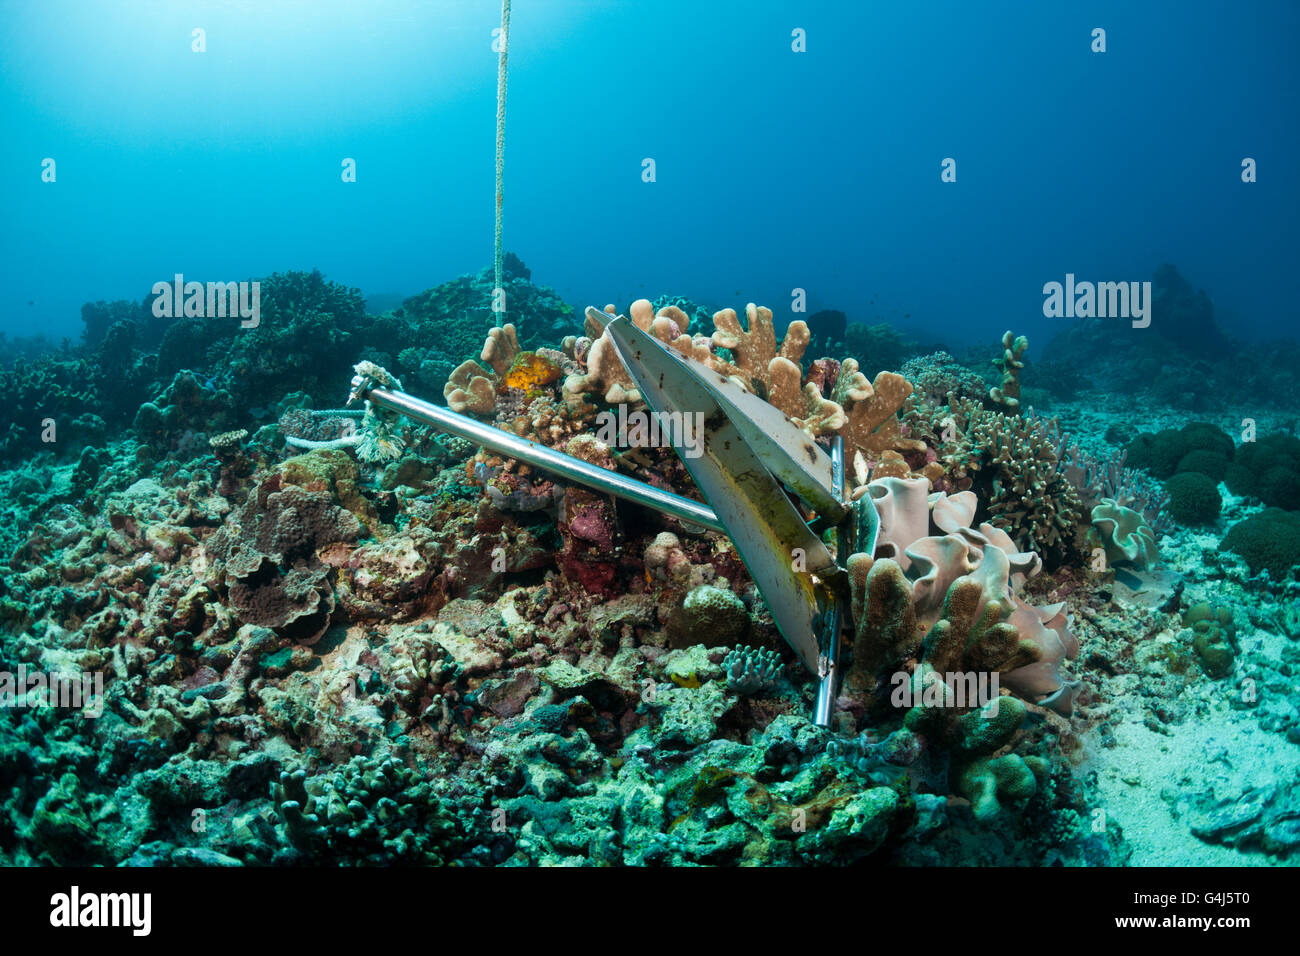 Anchor in Coral Reef, Indo Pacific, Indonesia Stock Photo